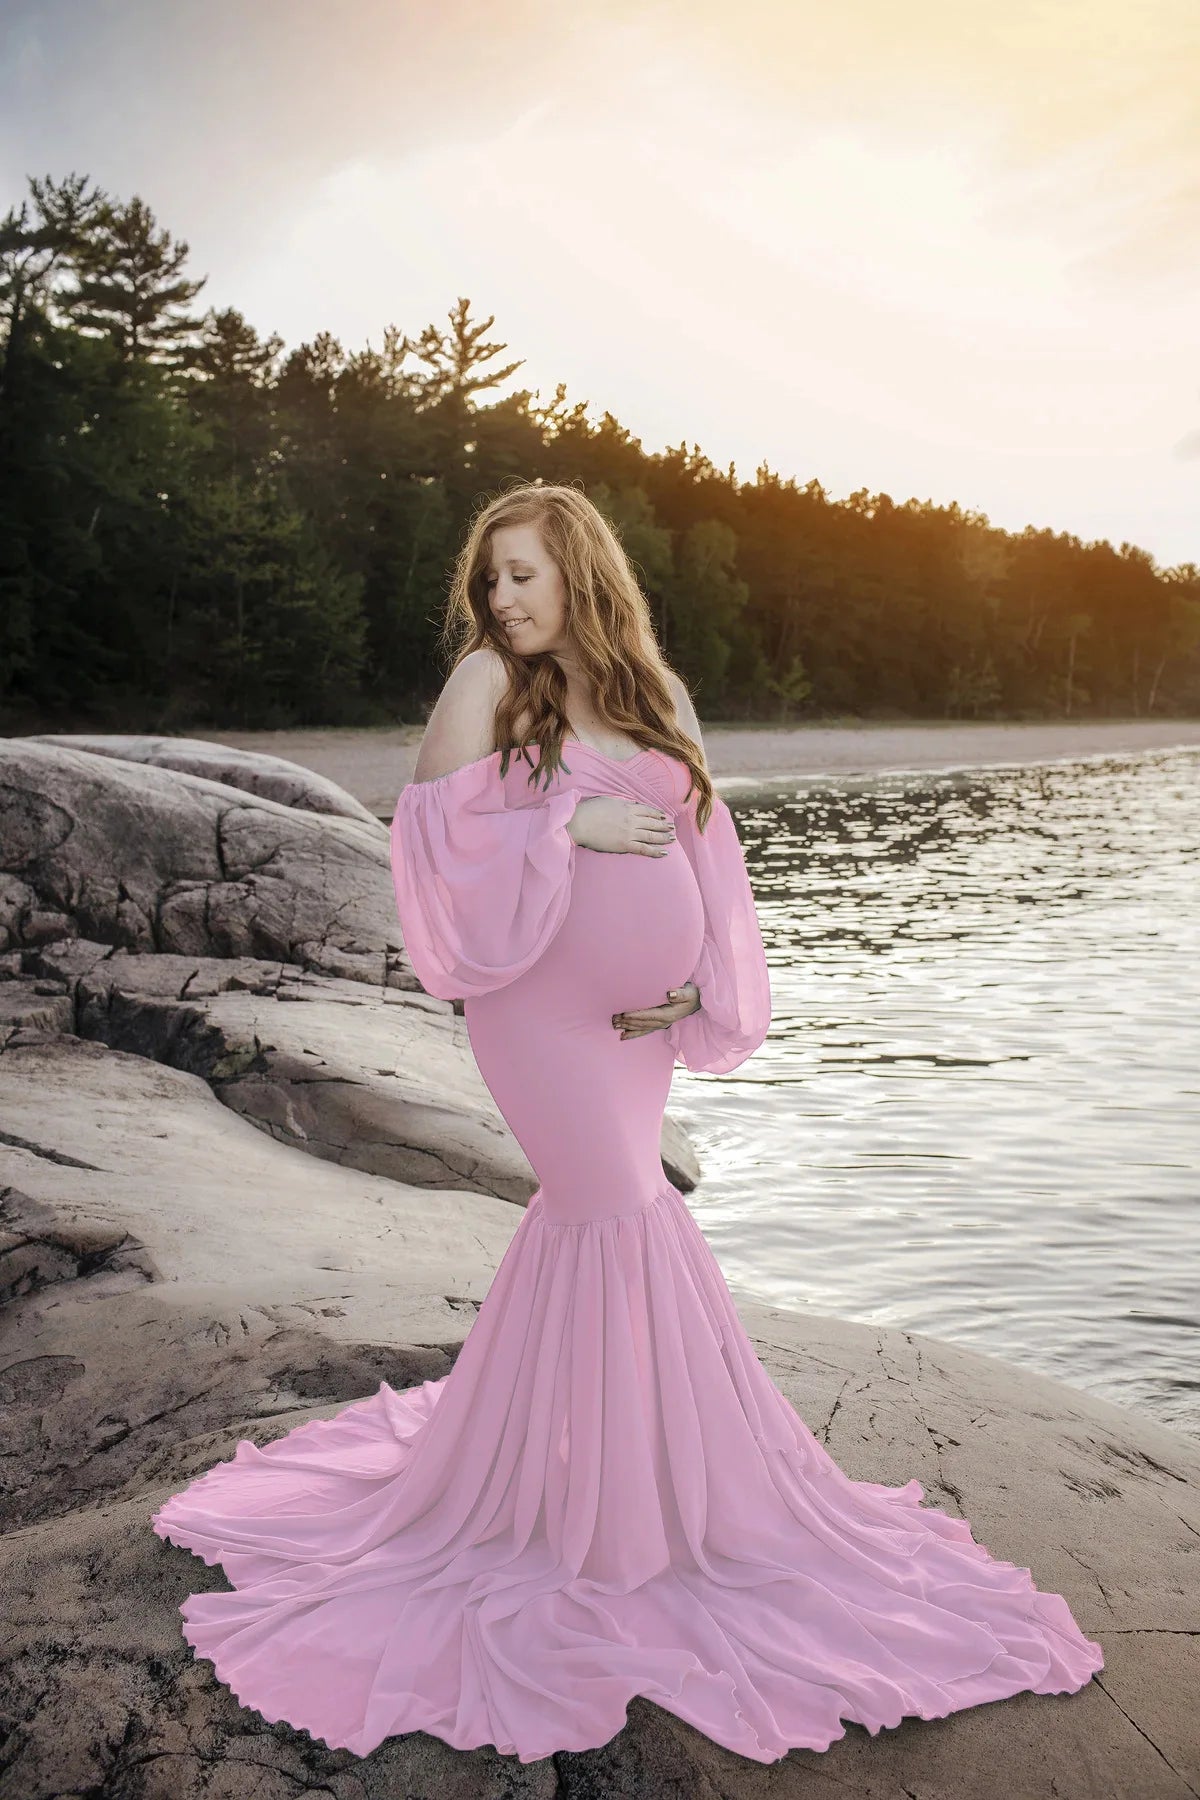 Maternity Dress for Photo Shoot Sexy Women Off Shoulder